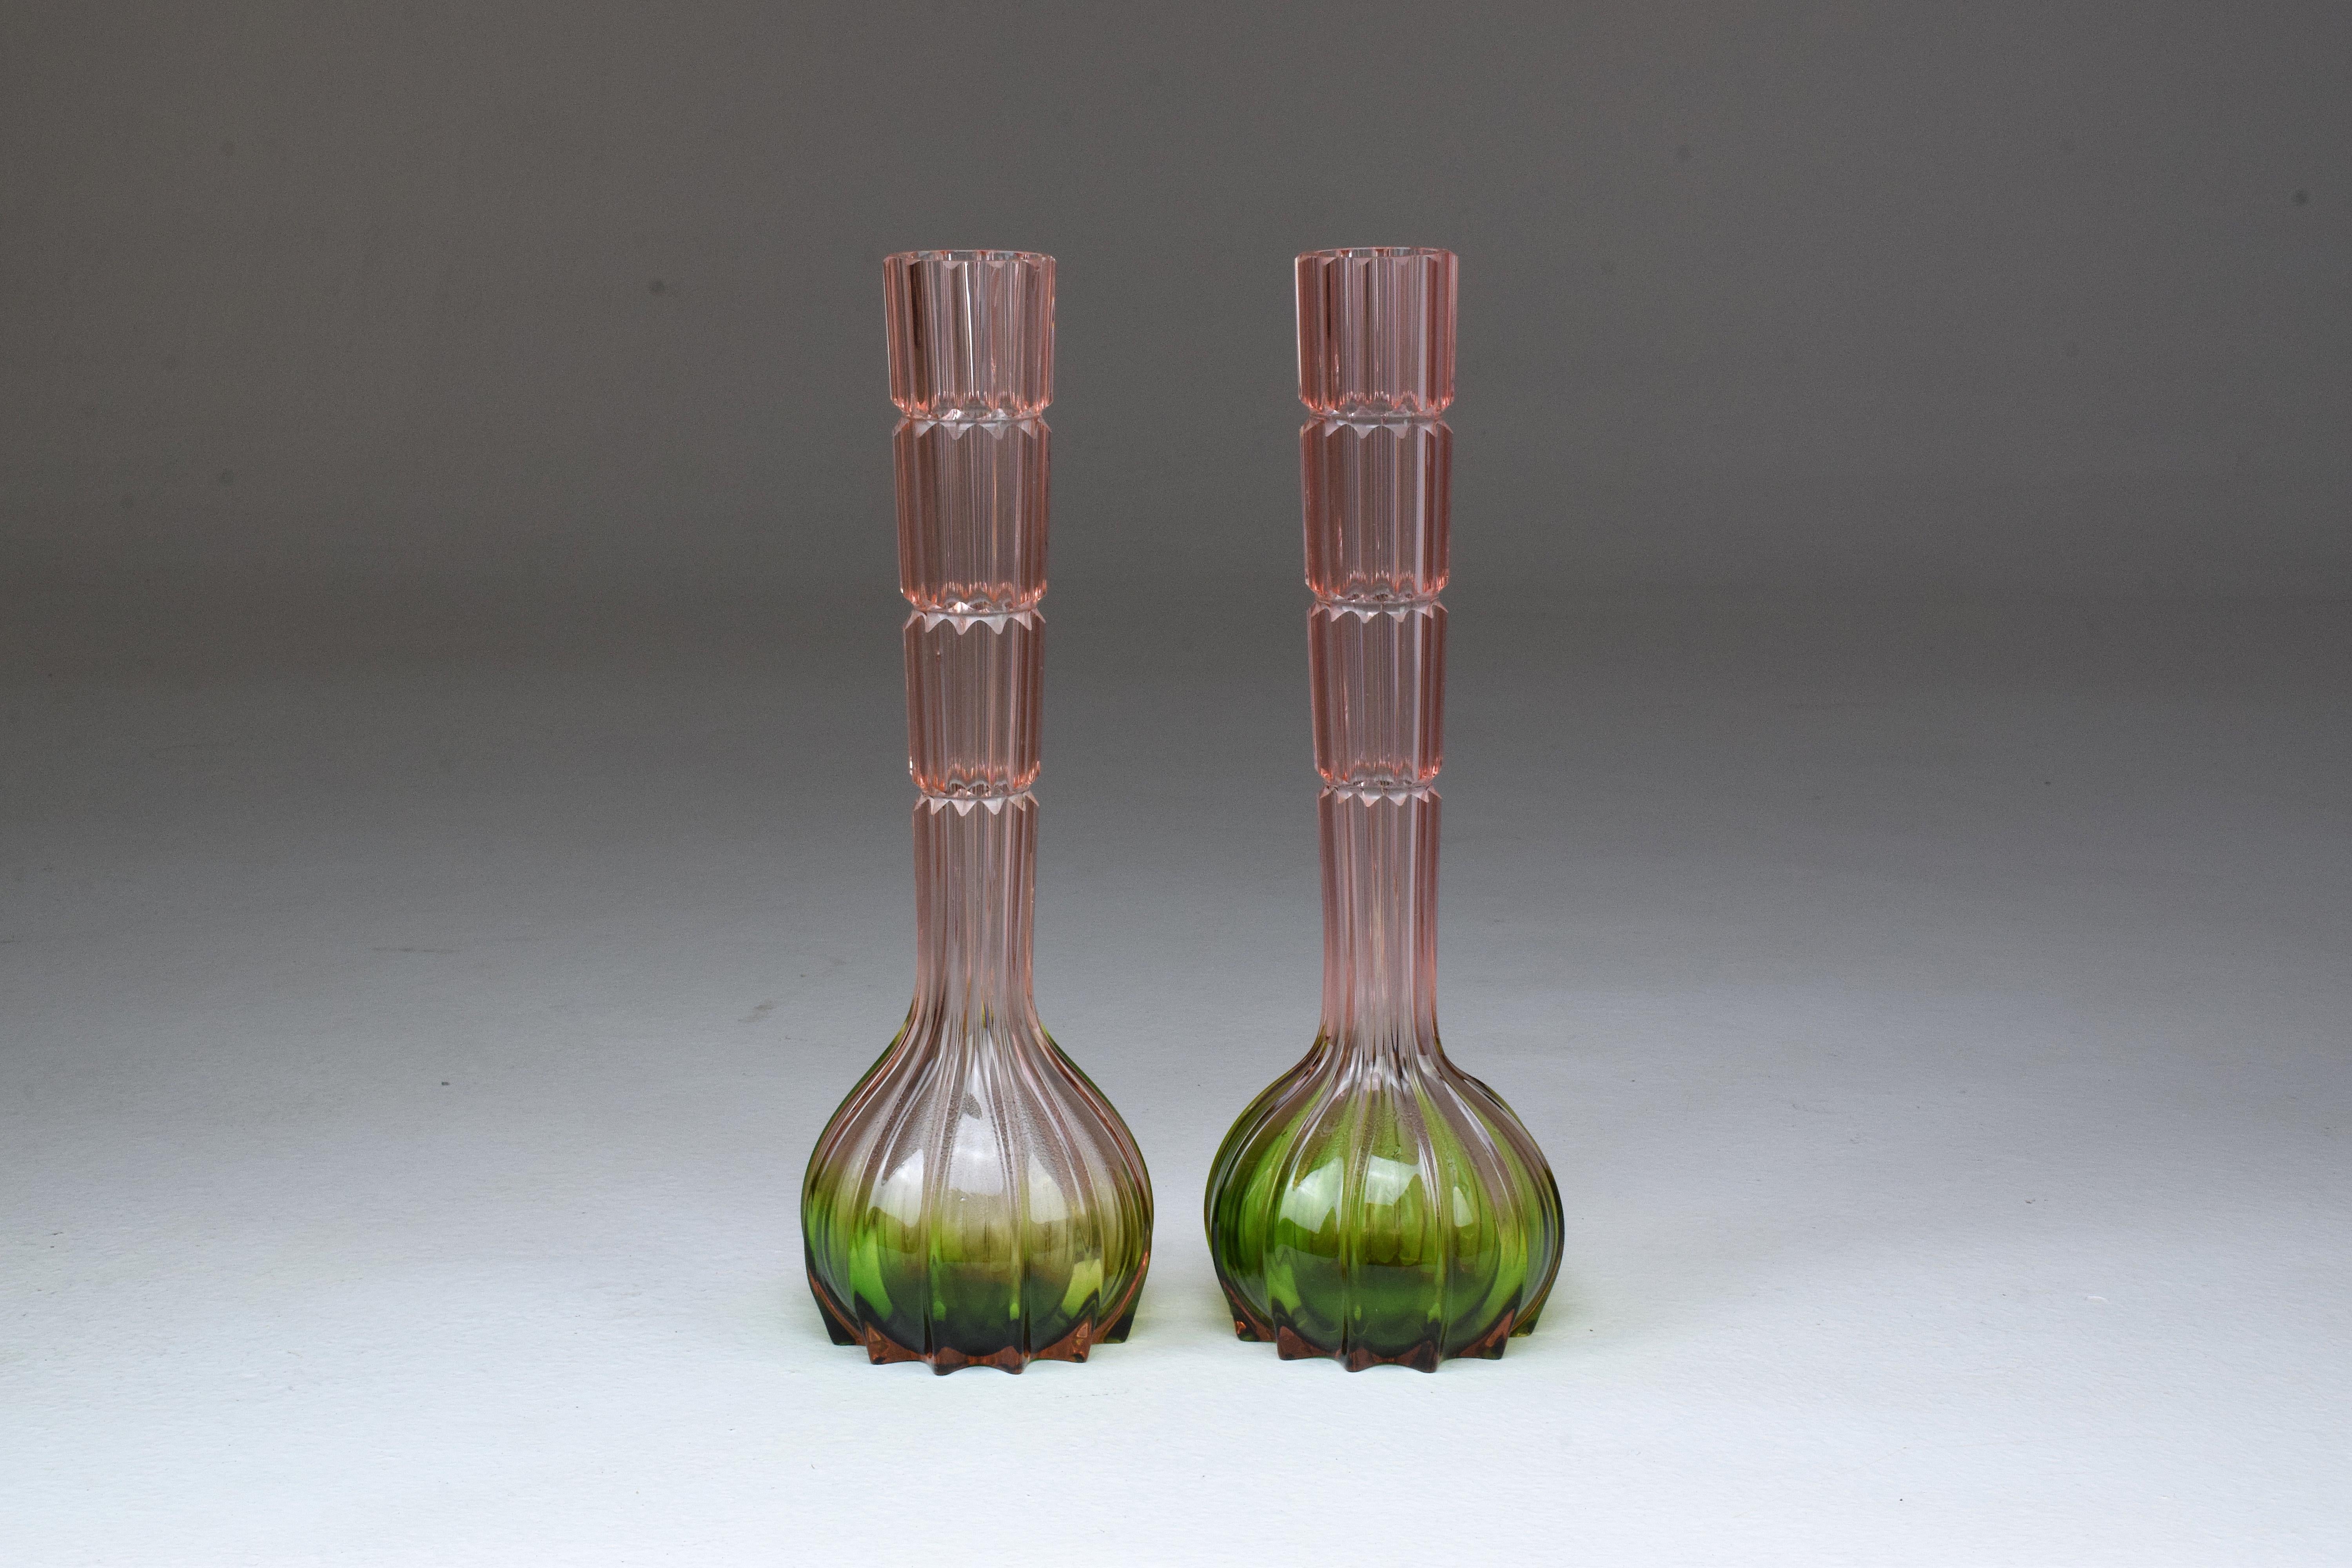 French midcentury art glass flower vases designed in hues of pink and green. Beautifully embellished.
Available as a set or as a unit.
France, 1960s.